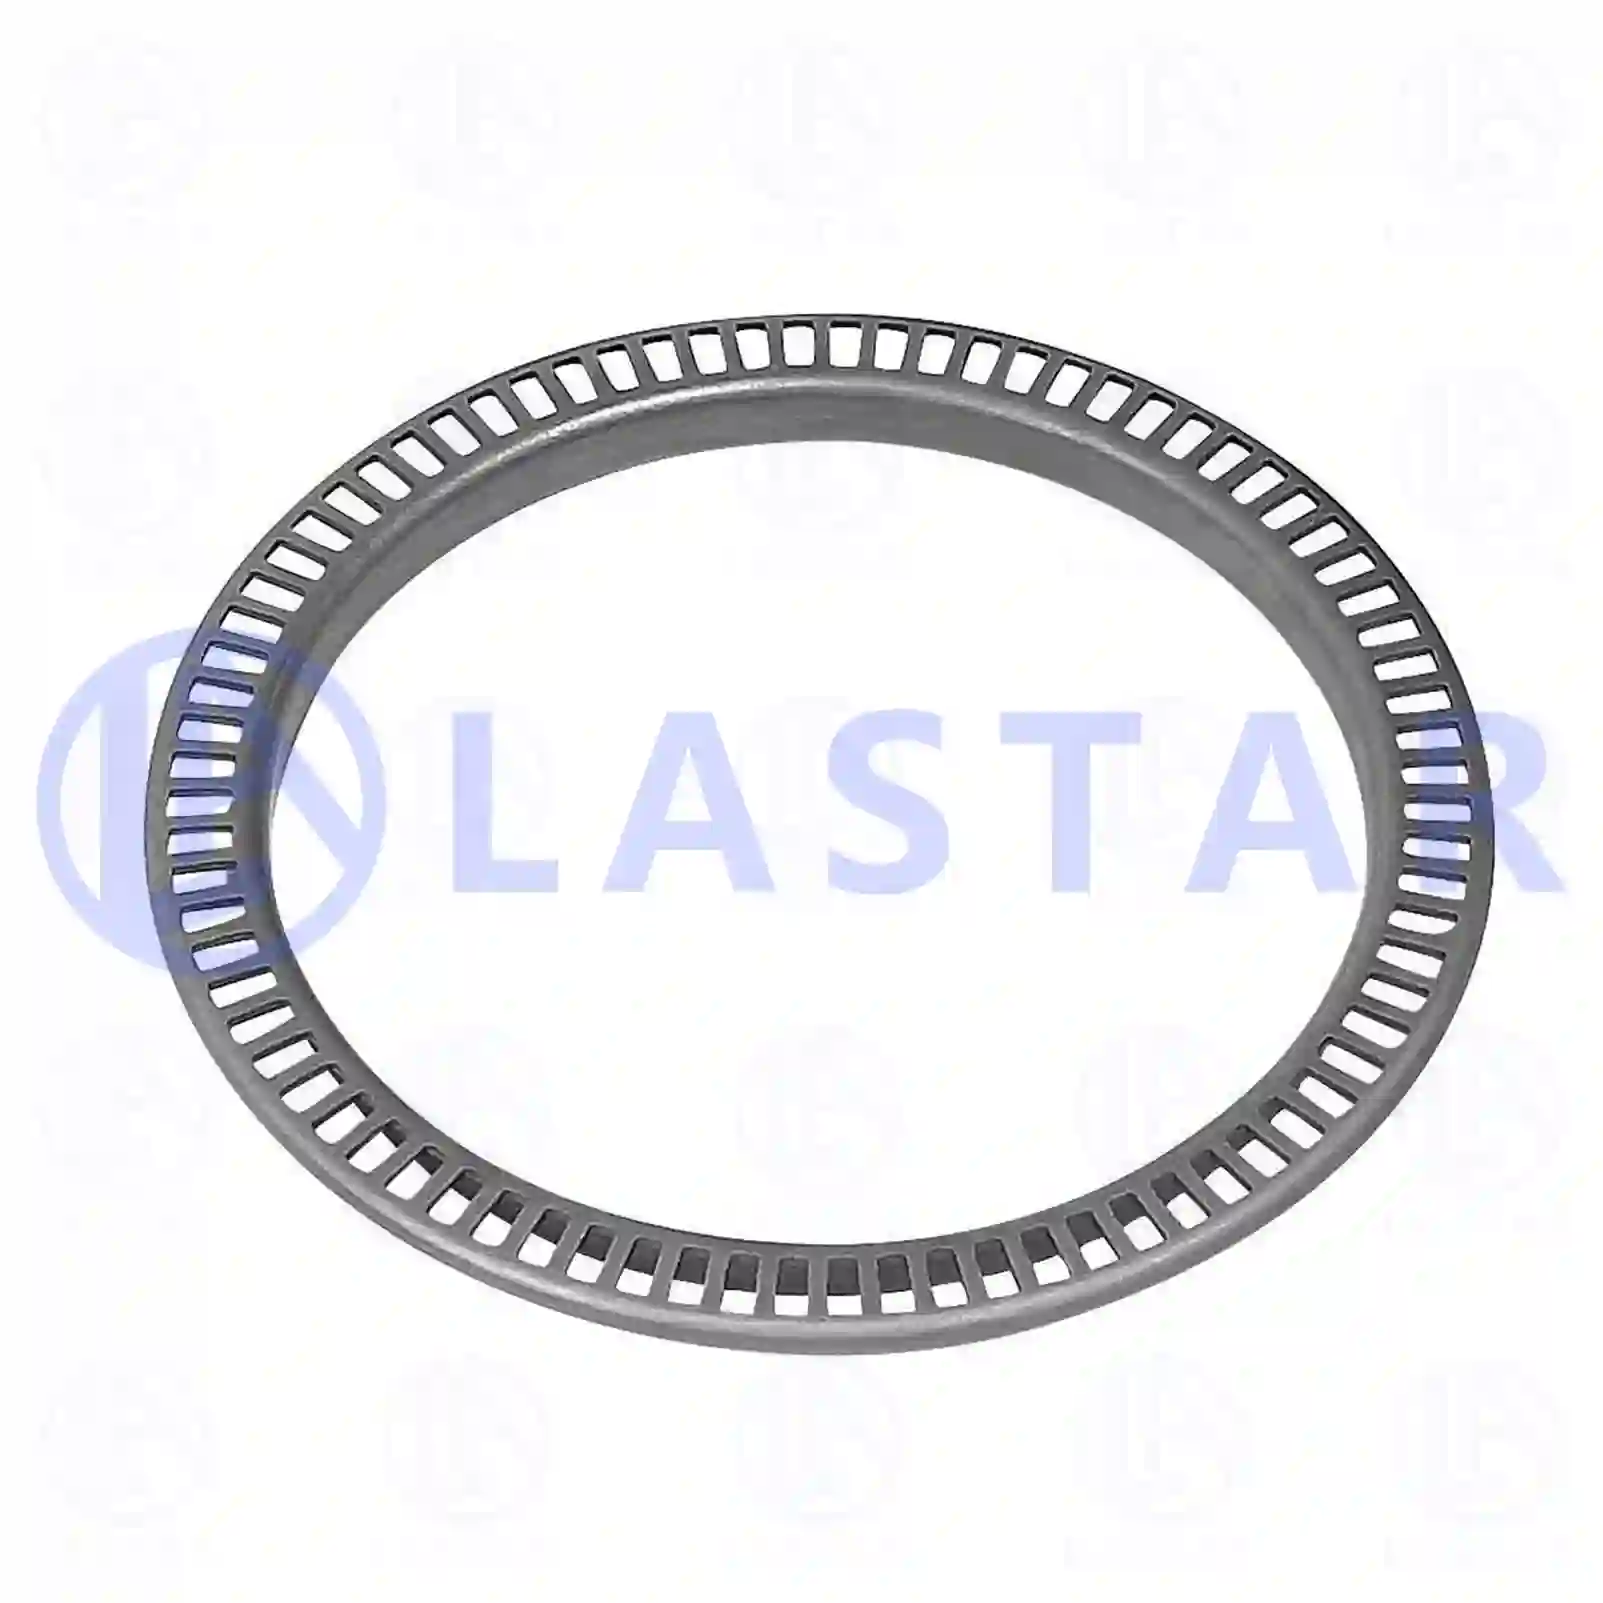 ABS ring, 77726373, 9753340415, ZG50015-0008, , ||  77726373 Lastar Spare Part | Truck Spare Parts, Auotomotive Spare Parts ABS ring, 77726373, 9753340415, ZG50015-0008, , ||  77726373 Lastar Spare Part | Truck Spare Parts, Auotomotive Spare Parts